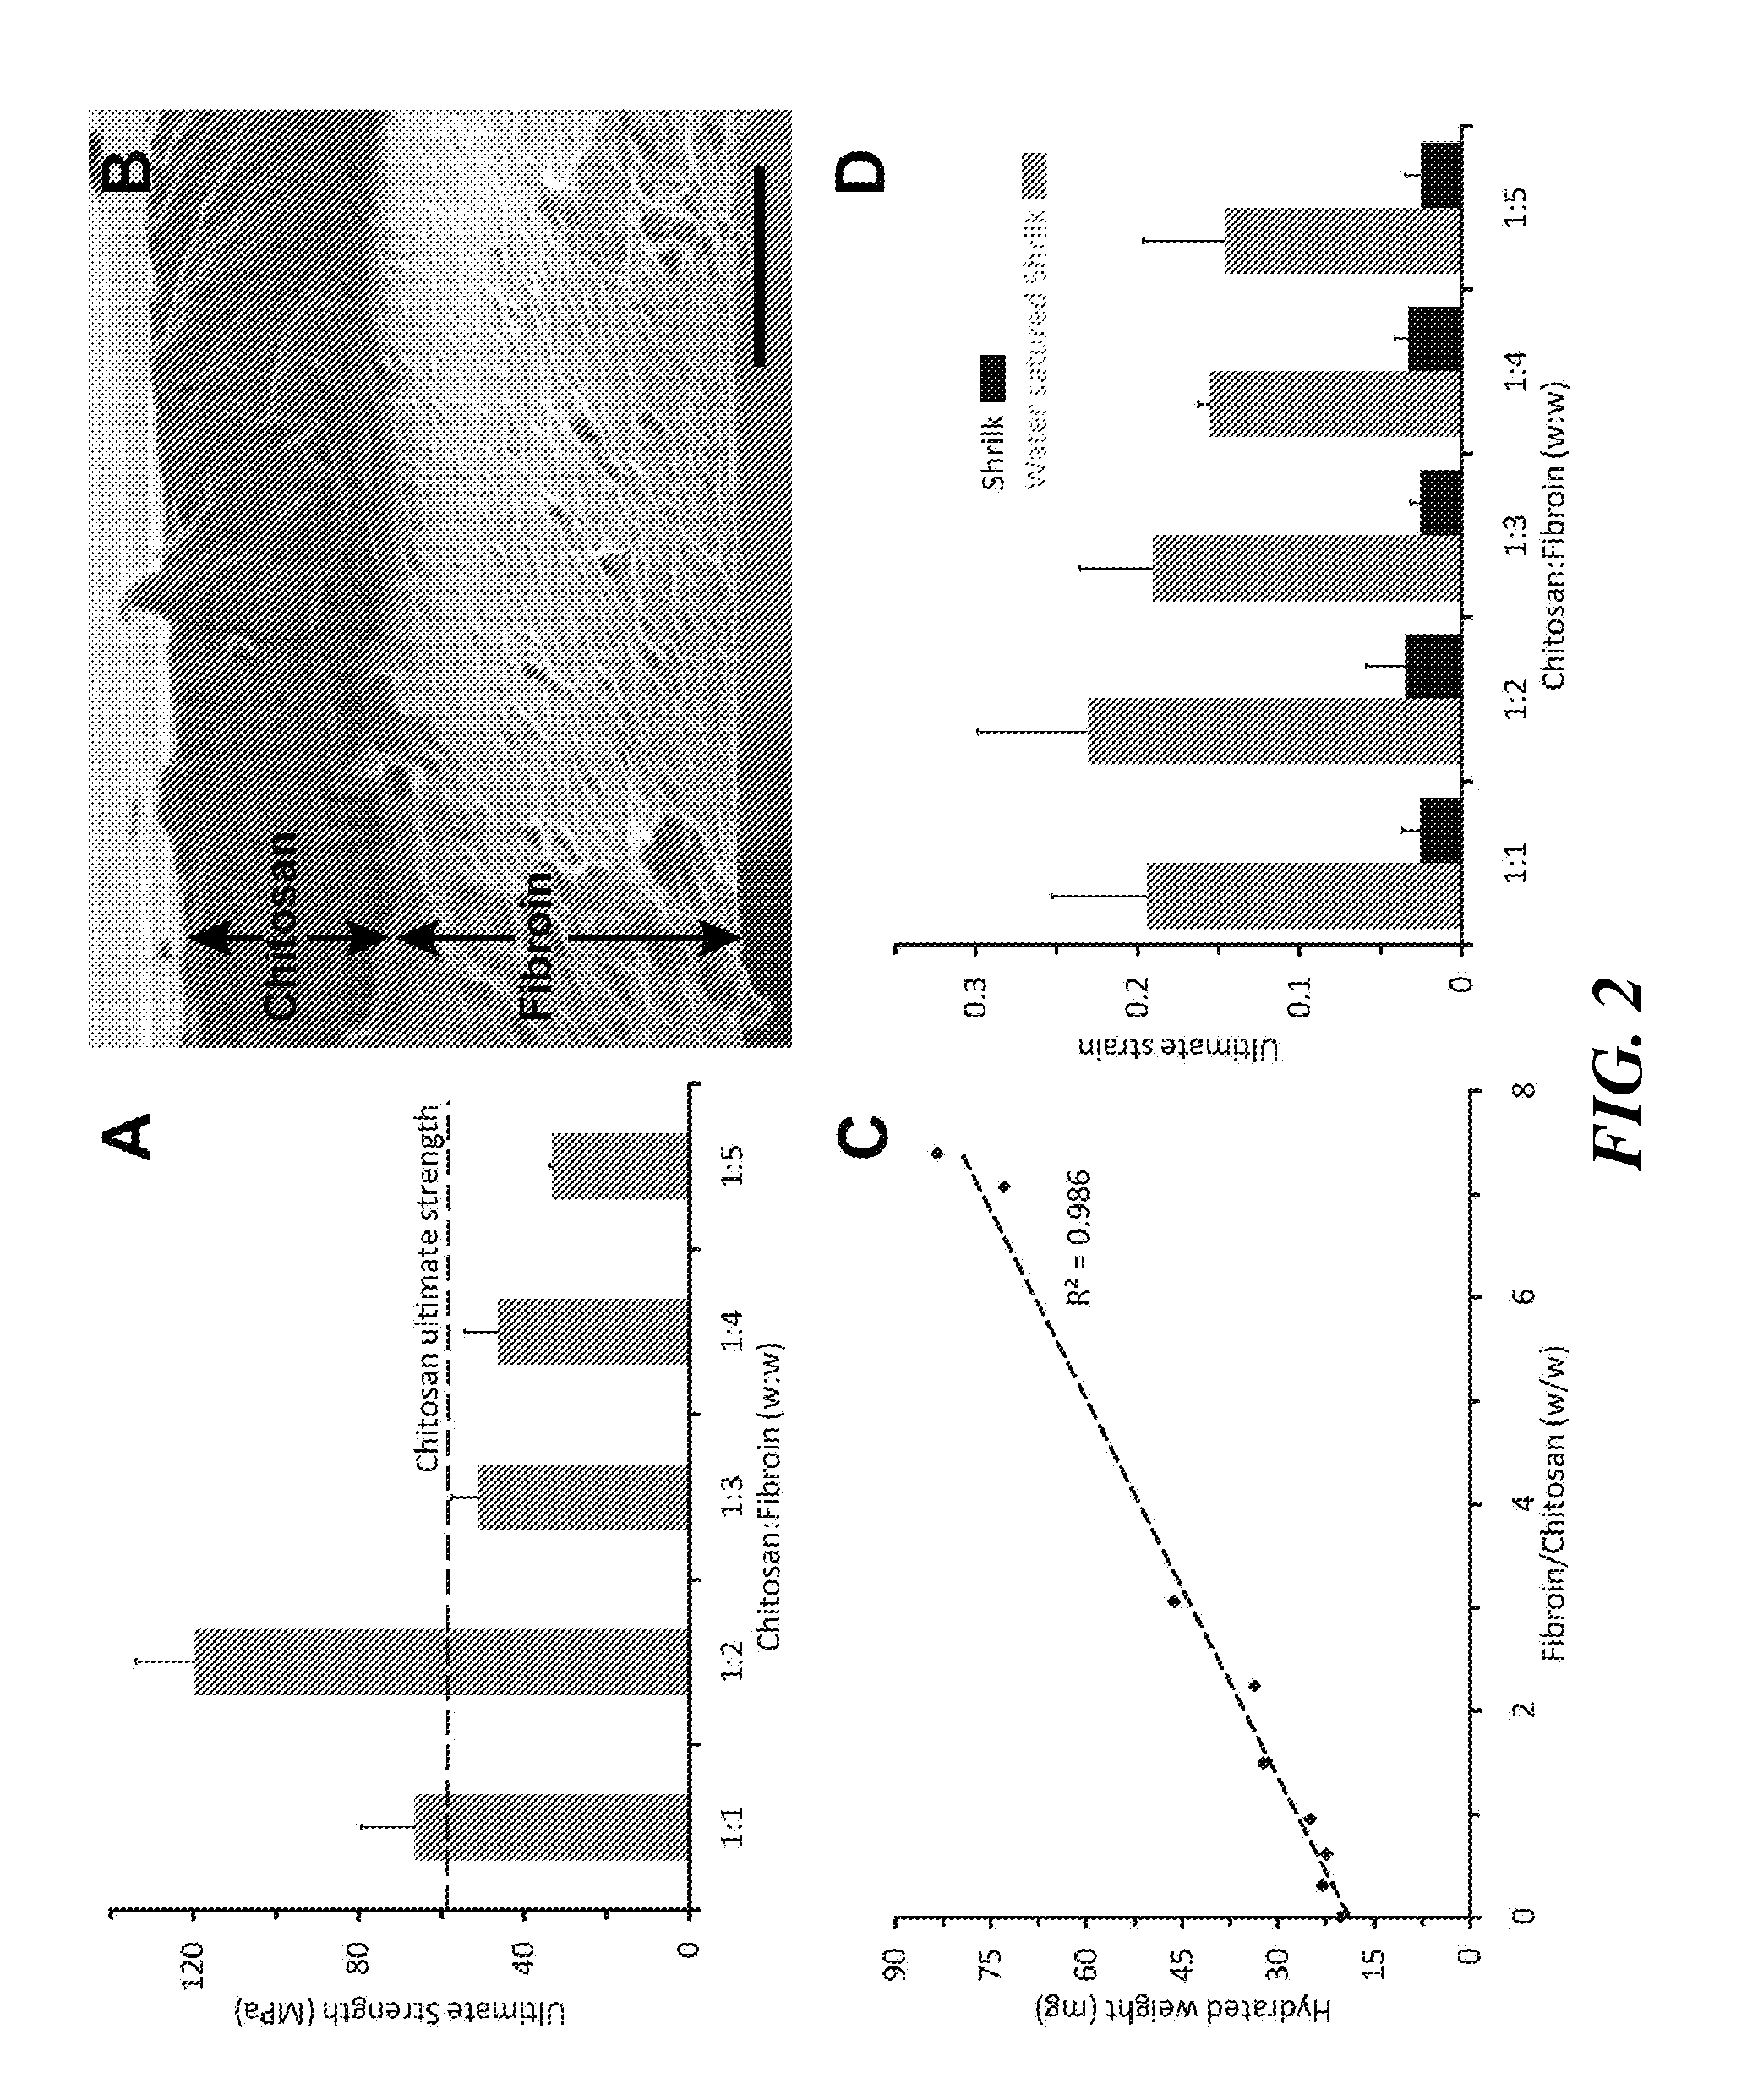 High strength chitin composite material and method of making